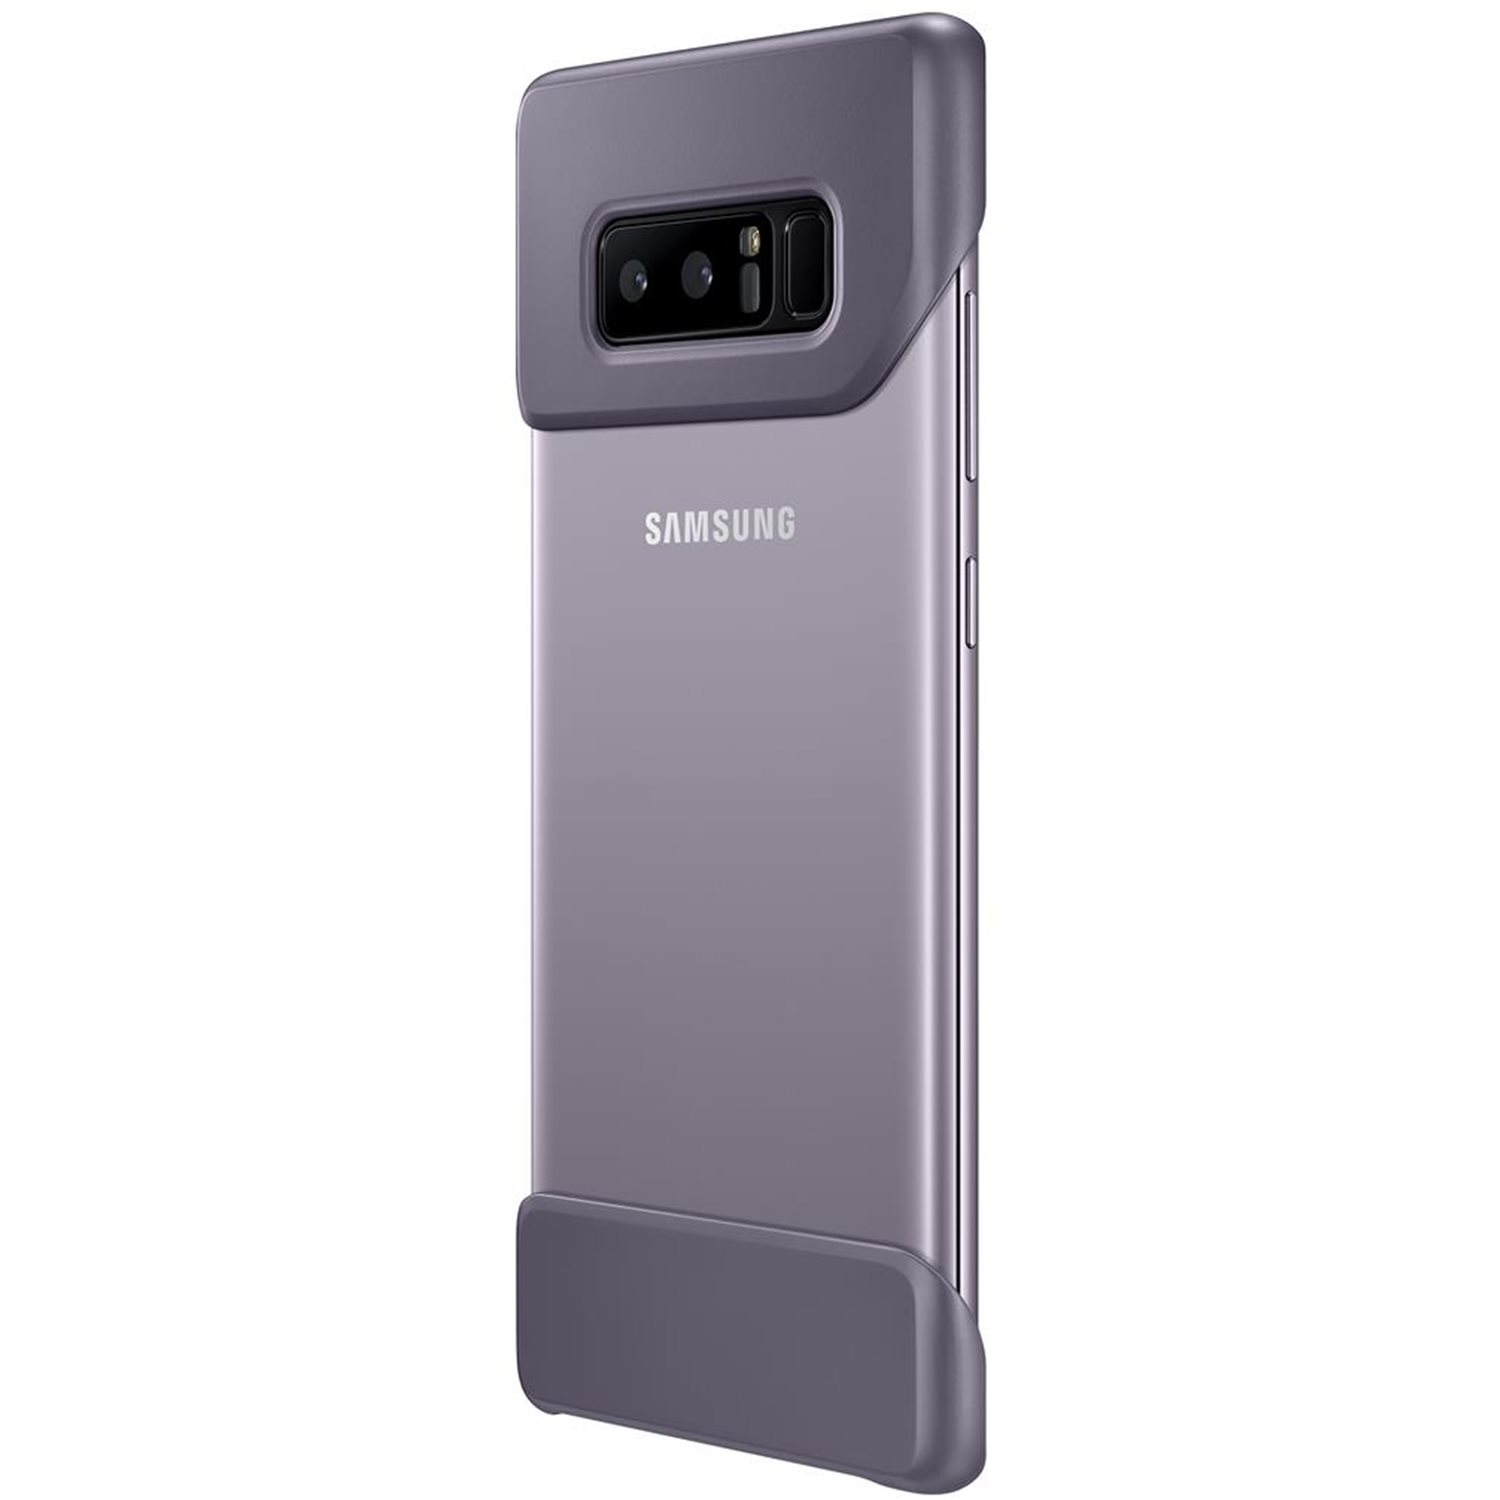 Official Samsung Galaxy Note 8 2-Piece Cover Case - Orchid Grey